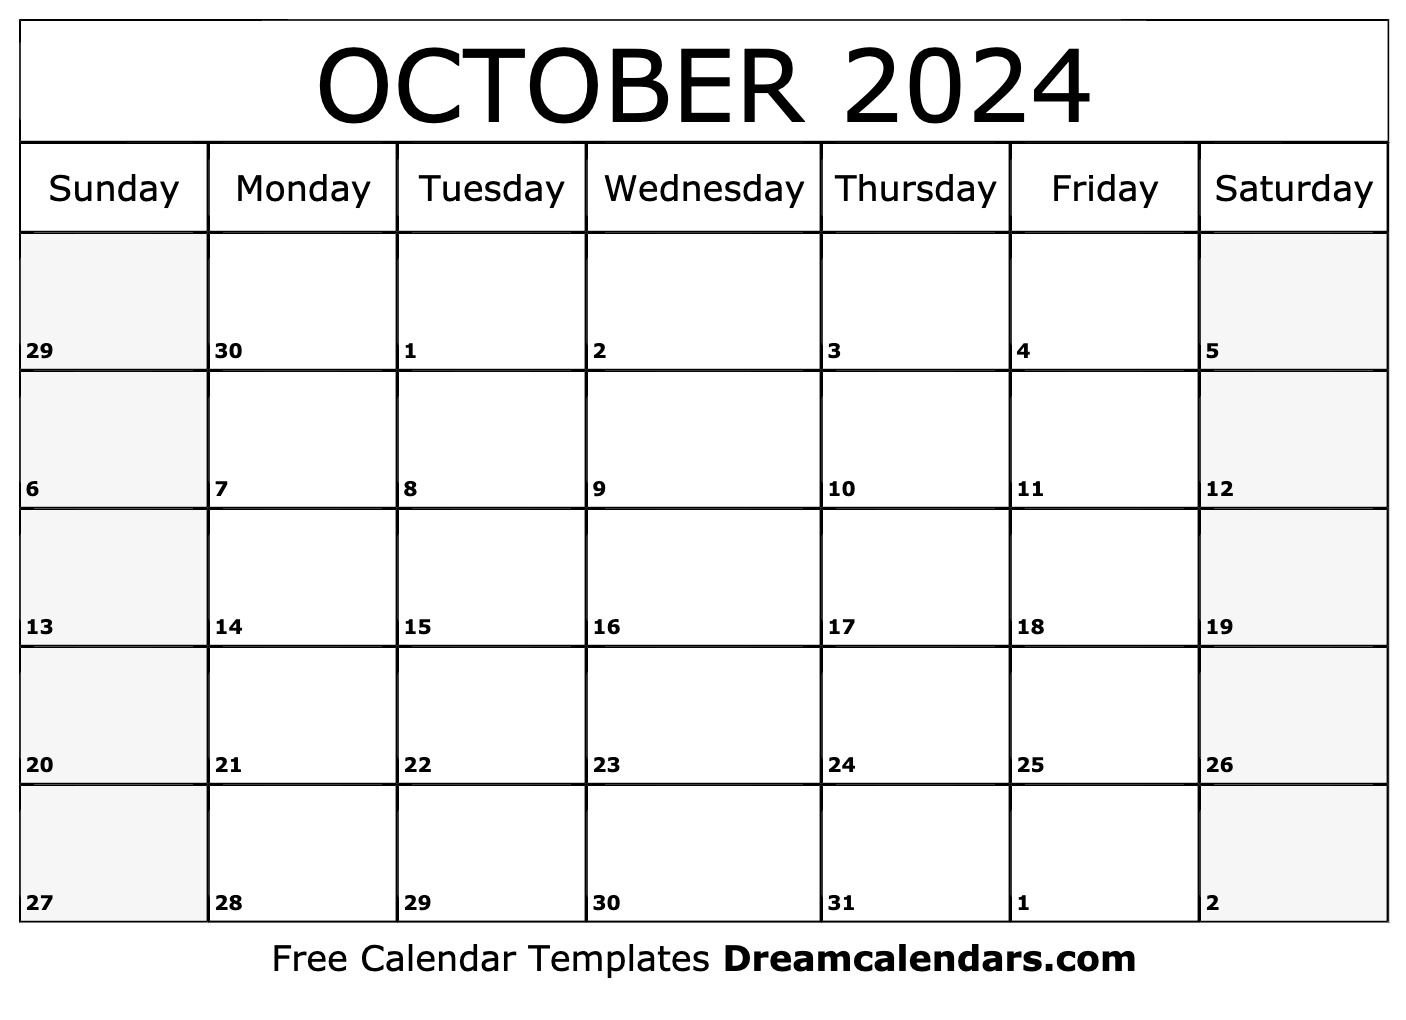 October 2024 Calendar | Free Blank Printable With Holidays for Printable October 2024 Calendar With Holidays